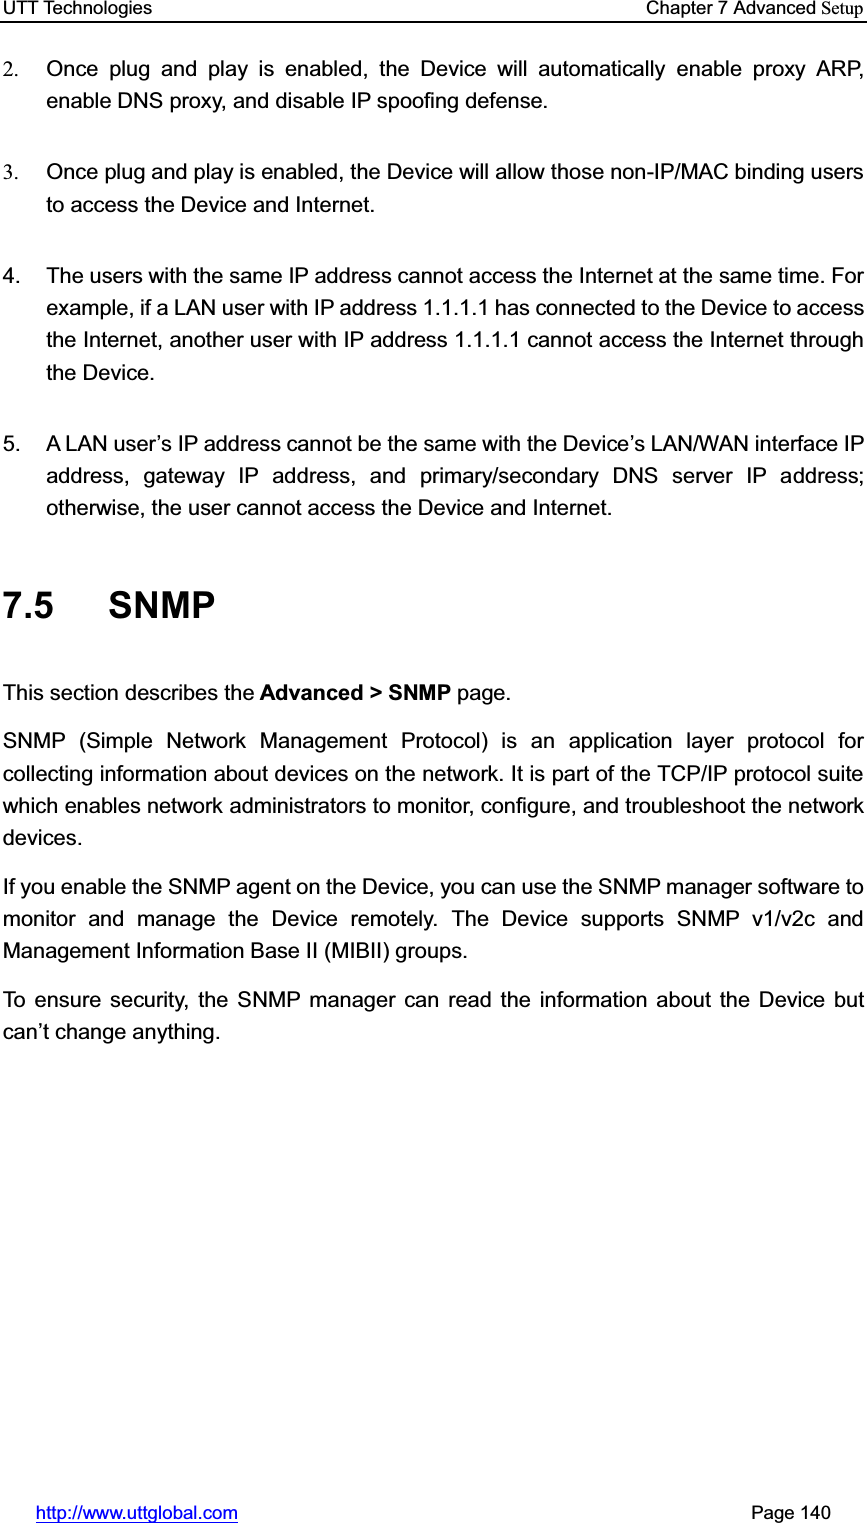 UTT Technologies    Chapter 7 Advanced Setuphttp://www.uttglobal.com                                                       Page 140 2.  Once plug and play is enabled, the Device will automatically enable proxy ARP, enable DNS proxy, and disable IP spoofing defense. 3.  Once plug and play is enabled, the Device will allow those non-IP/MAC binding users to access the Device and Internet.4.  The users with the same IP address cannot access the Internet at the same time. For example, if a LAN user with IP address 1.1.1.1 has connected to the Device to access the Internet, another user with IP address 1.1.1.1 cannot access the Internet through the Device. 5.  A LAN user¶s IP address cannot be the same with the Device¶s LAN/WAN interface IP address, gateway IP address, and primary/secondary DNS server IP address; otherwise, the user cannot access the Device and Internet. 7.5 SNMPThis section describes the Advanced &gt; SNMP page. SNMP (Simple Network Management Protocol) is an application layer protocol for collecting information about devices on the network. It is part of the TCP/IP protocol suite which enables network administrators to monitor, configure, and troubleshoot the network devices. If you enable the SNMP agent on the Device, you can use the SNMP manager software to monitor and manage the Device remotely. The Device supports SNMP v1/v2c and Management Information Base II (MIBII) groups.   To ensure security, the SNMP manager can read the information about the Device but can¶t change anything.   